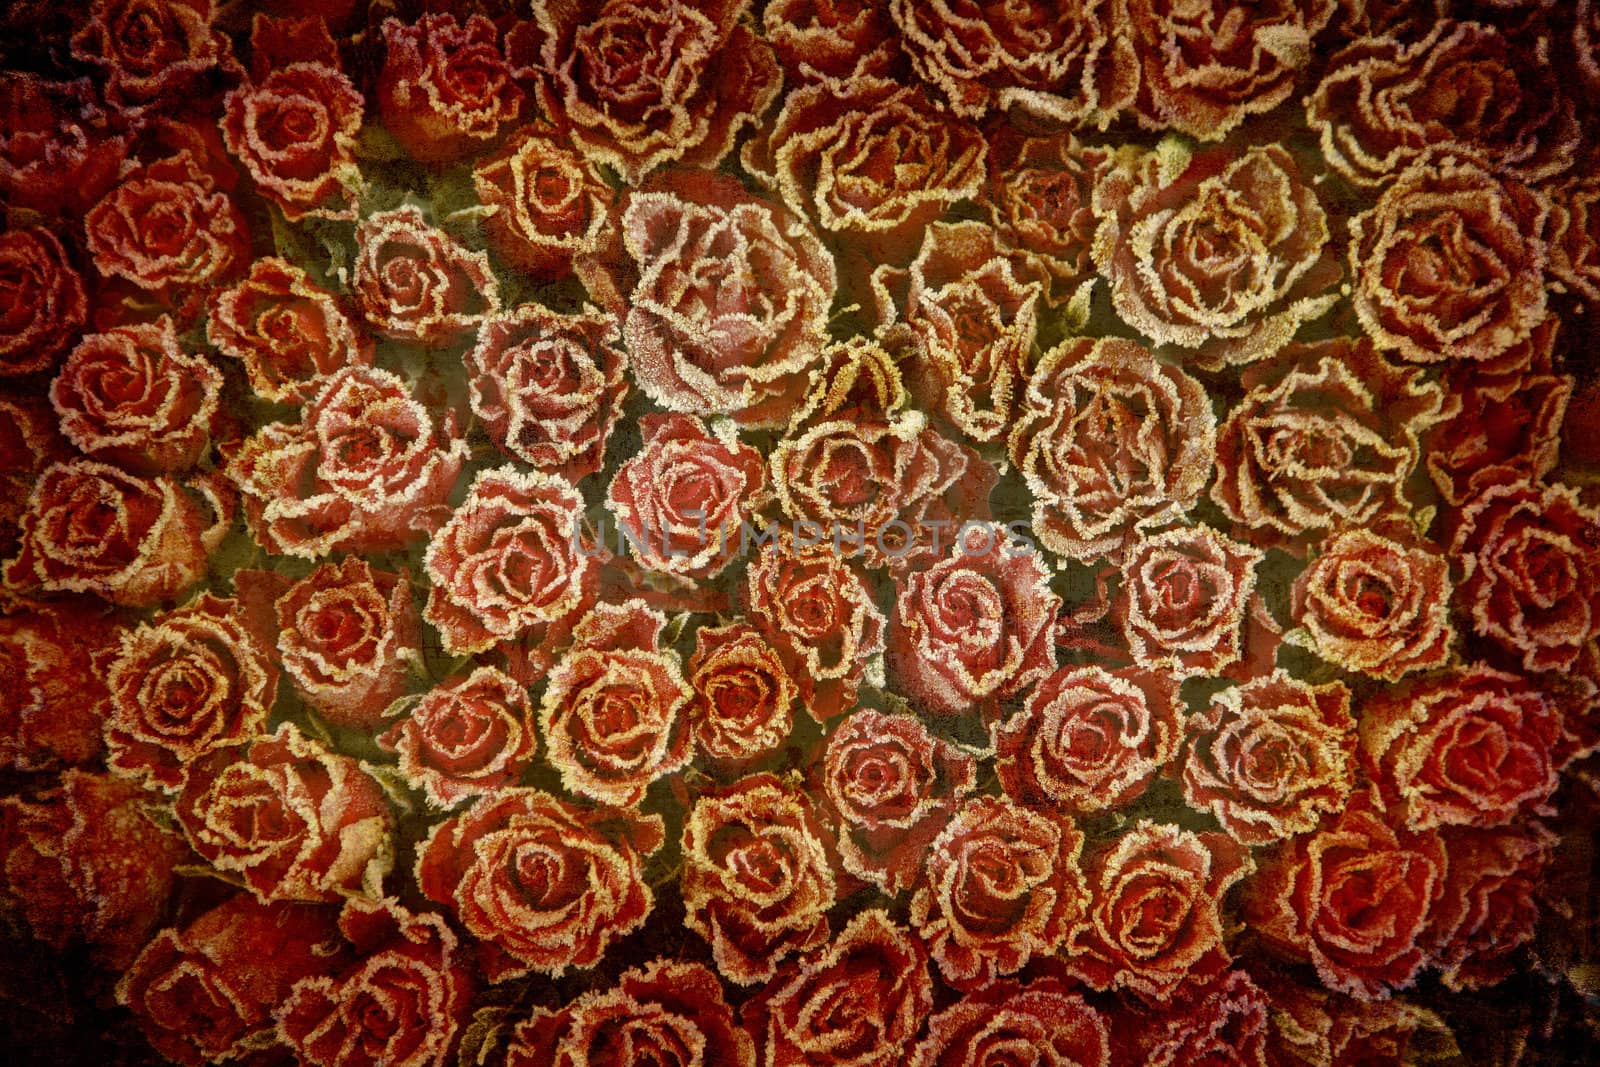 Frozen red roses by ABCDK